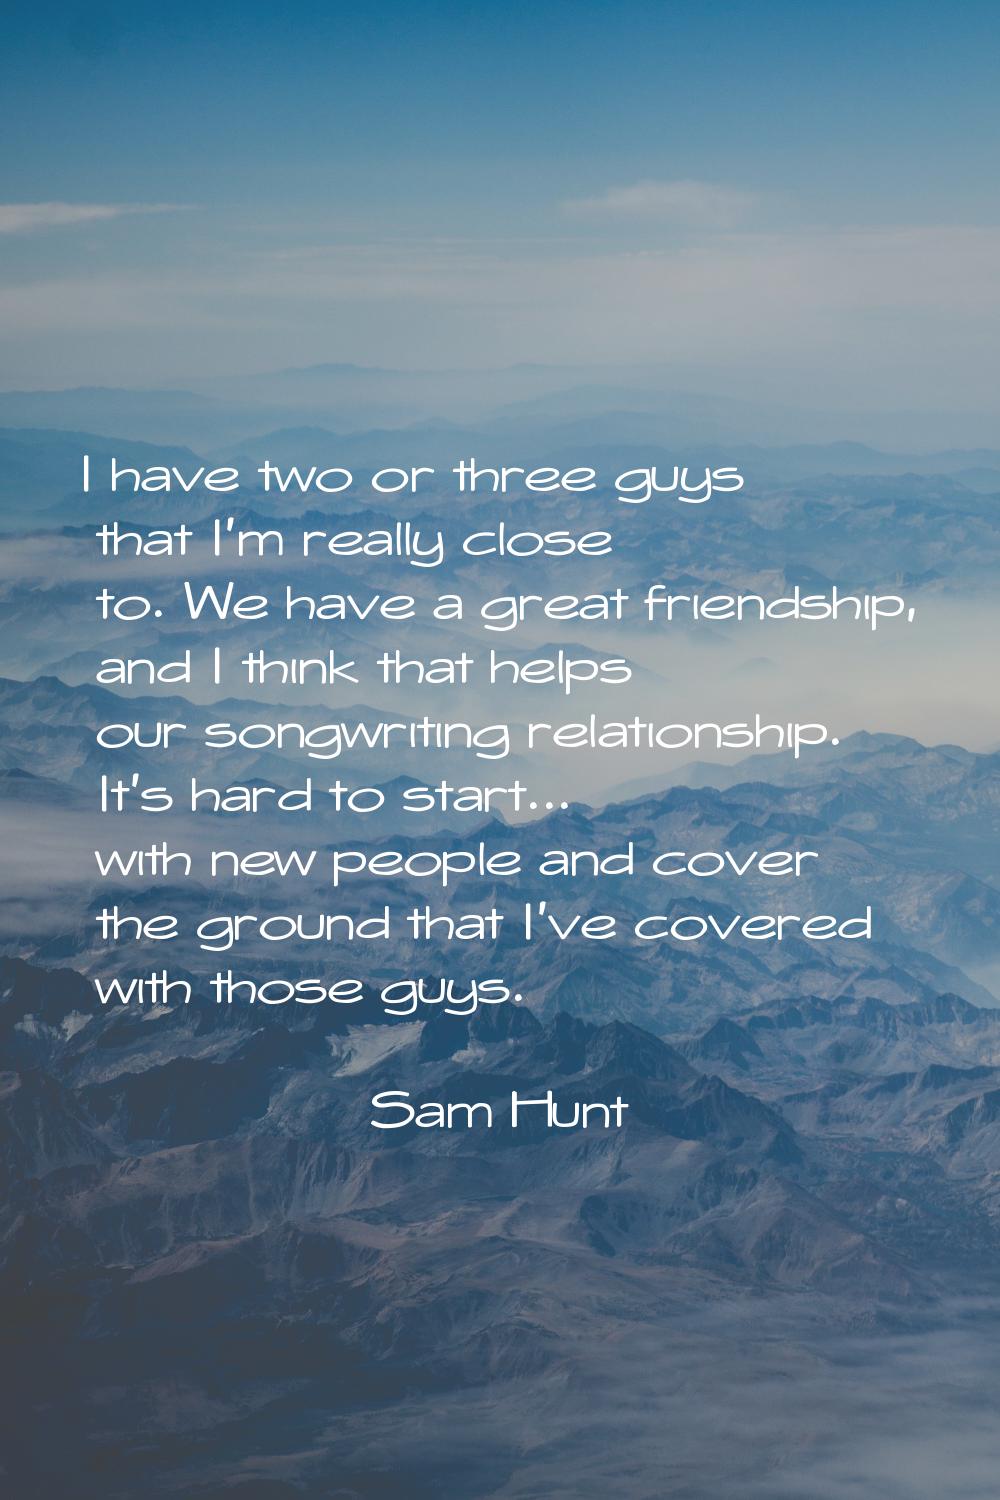 I have two or three guys that I'm really close to. We have a great friendship, and I think that hel